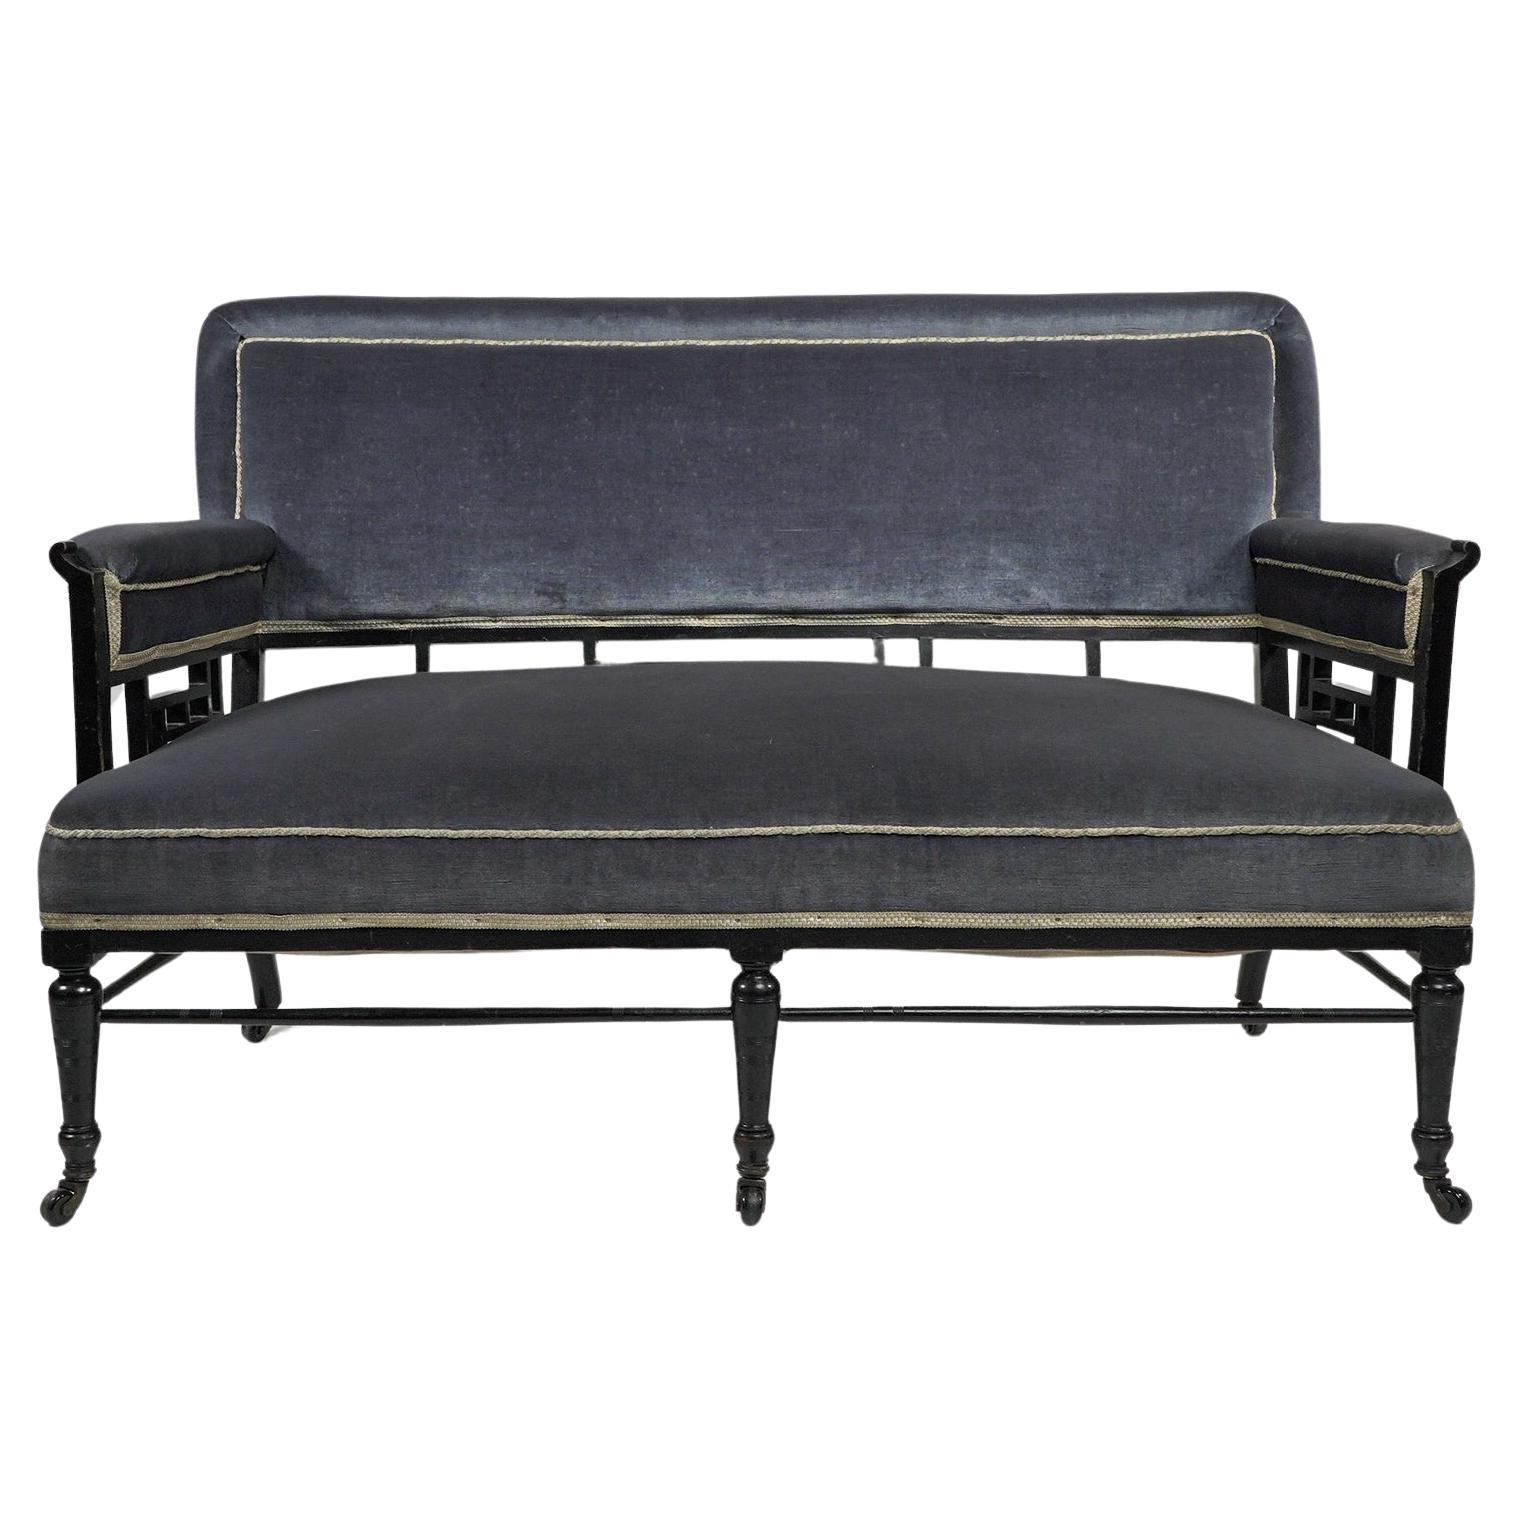 H W Batley attributed. An Anglo-Japanese settee with Japanese fretwork below the backrest and the arms, the arms with pagoda shaped details. Blue velvet upholstery, slightly faded but in good condition, standing on turned legs united by finely